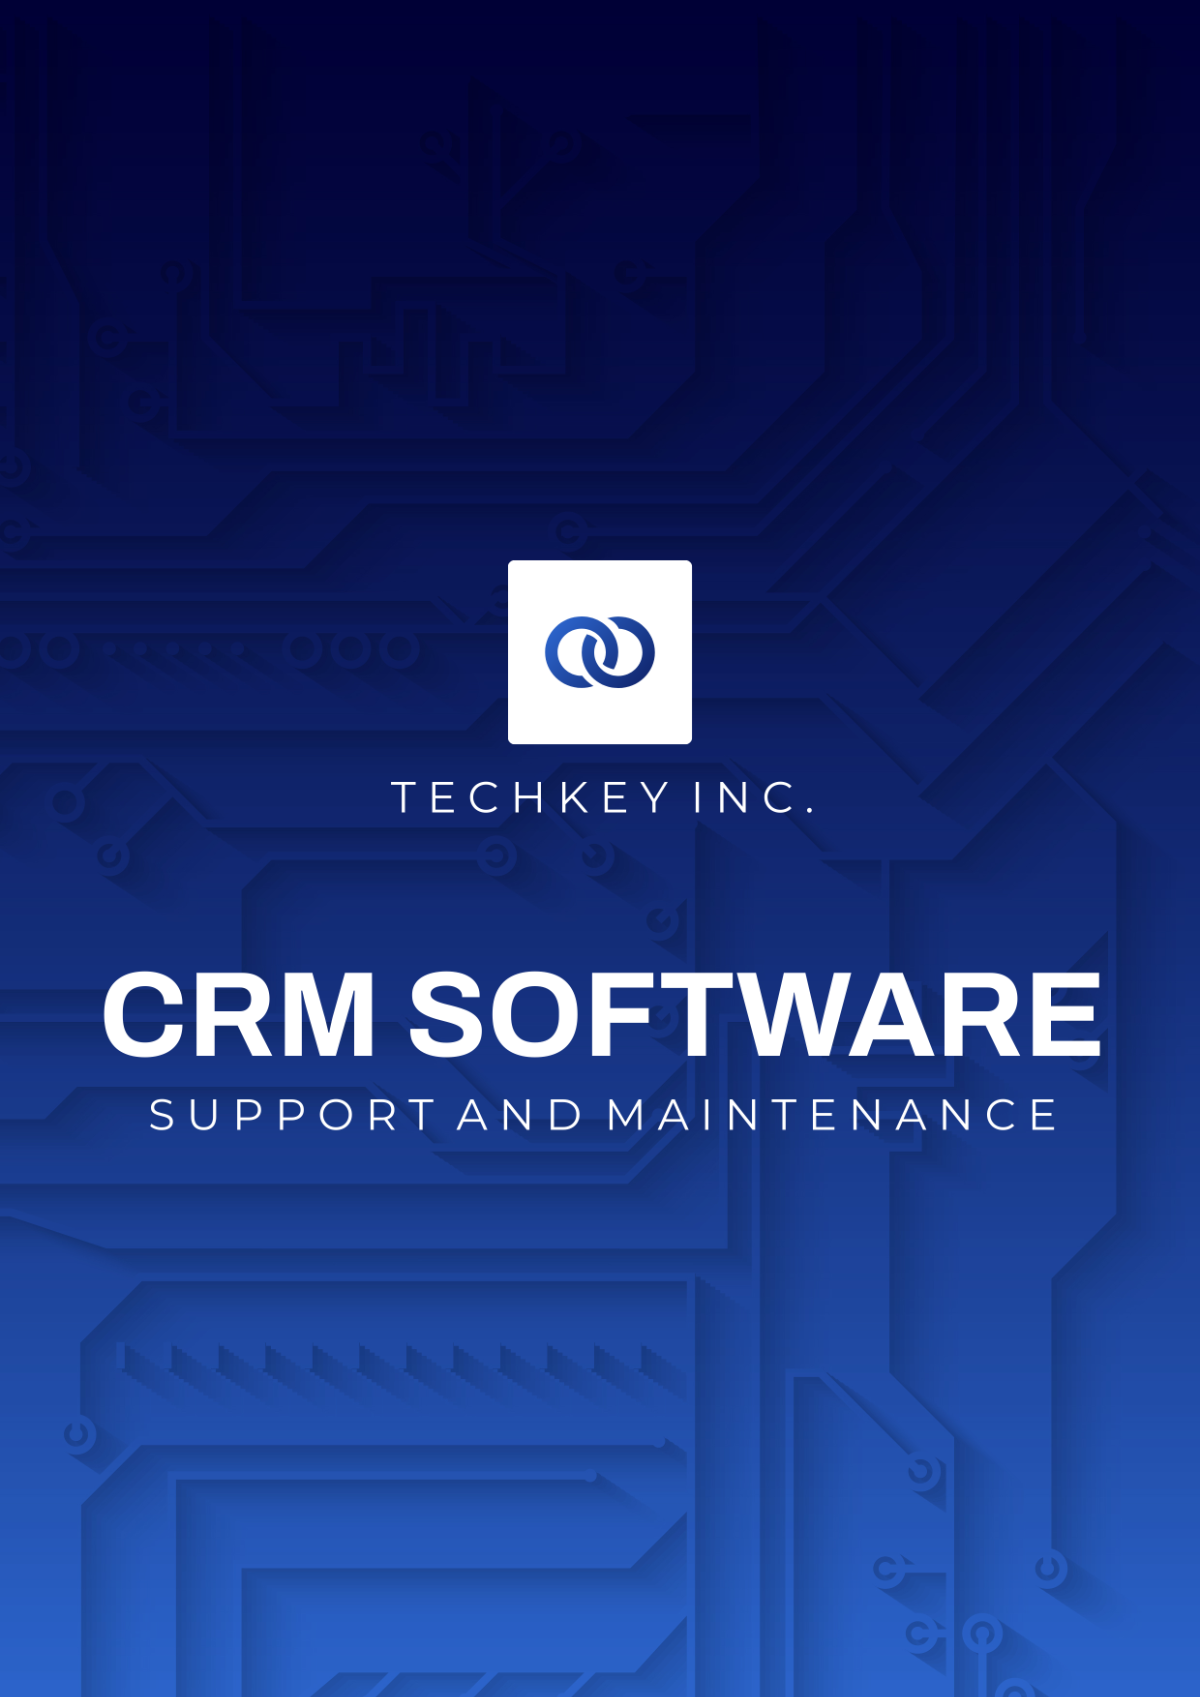 Modern Support and Maintenance Cover Page